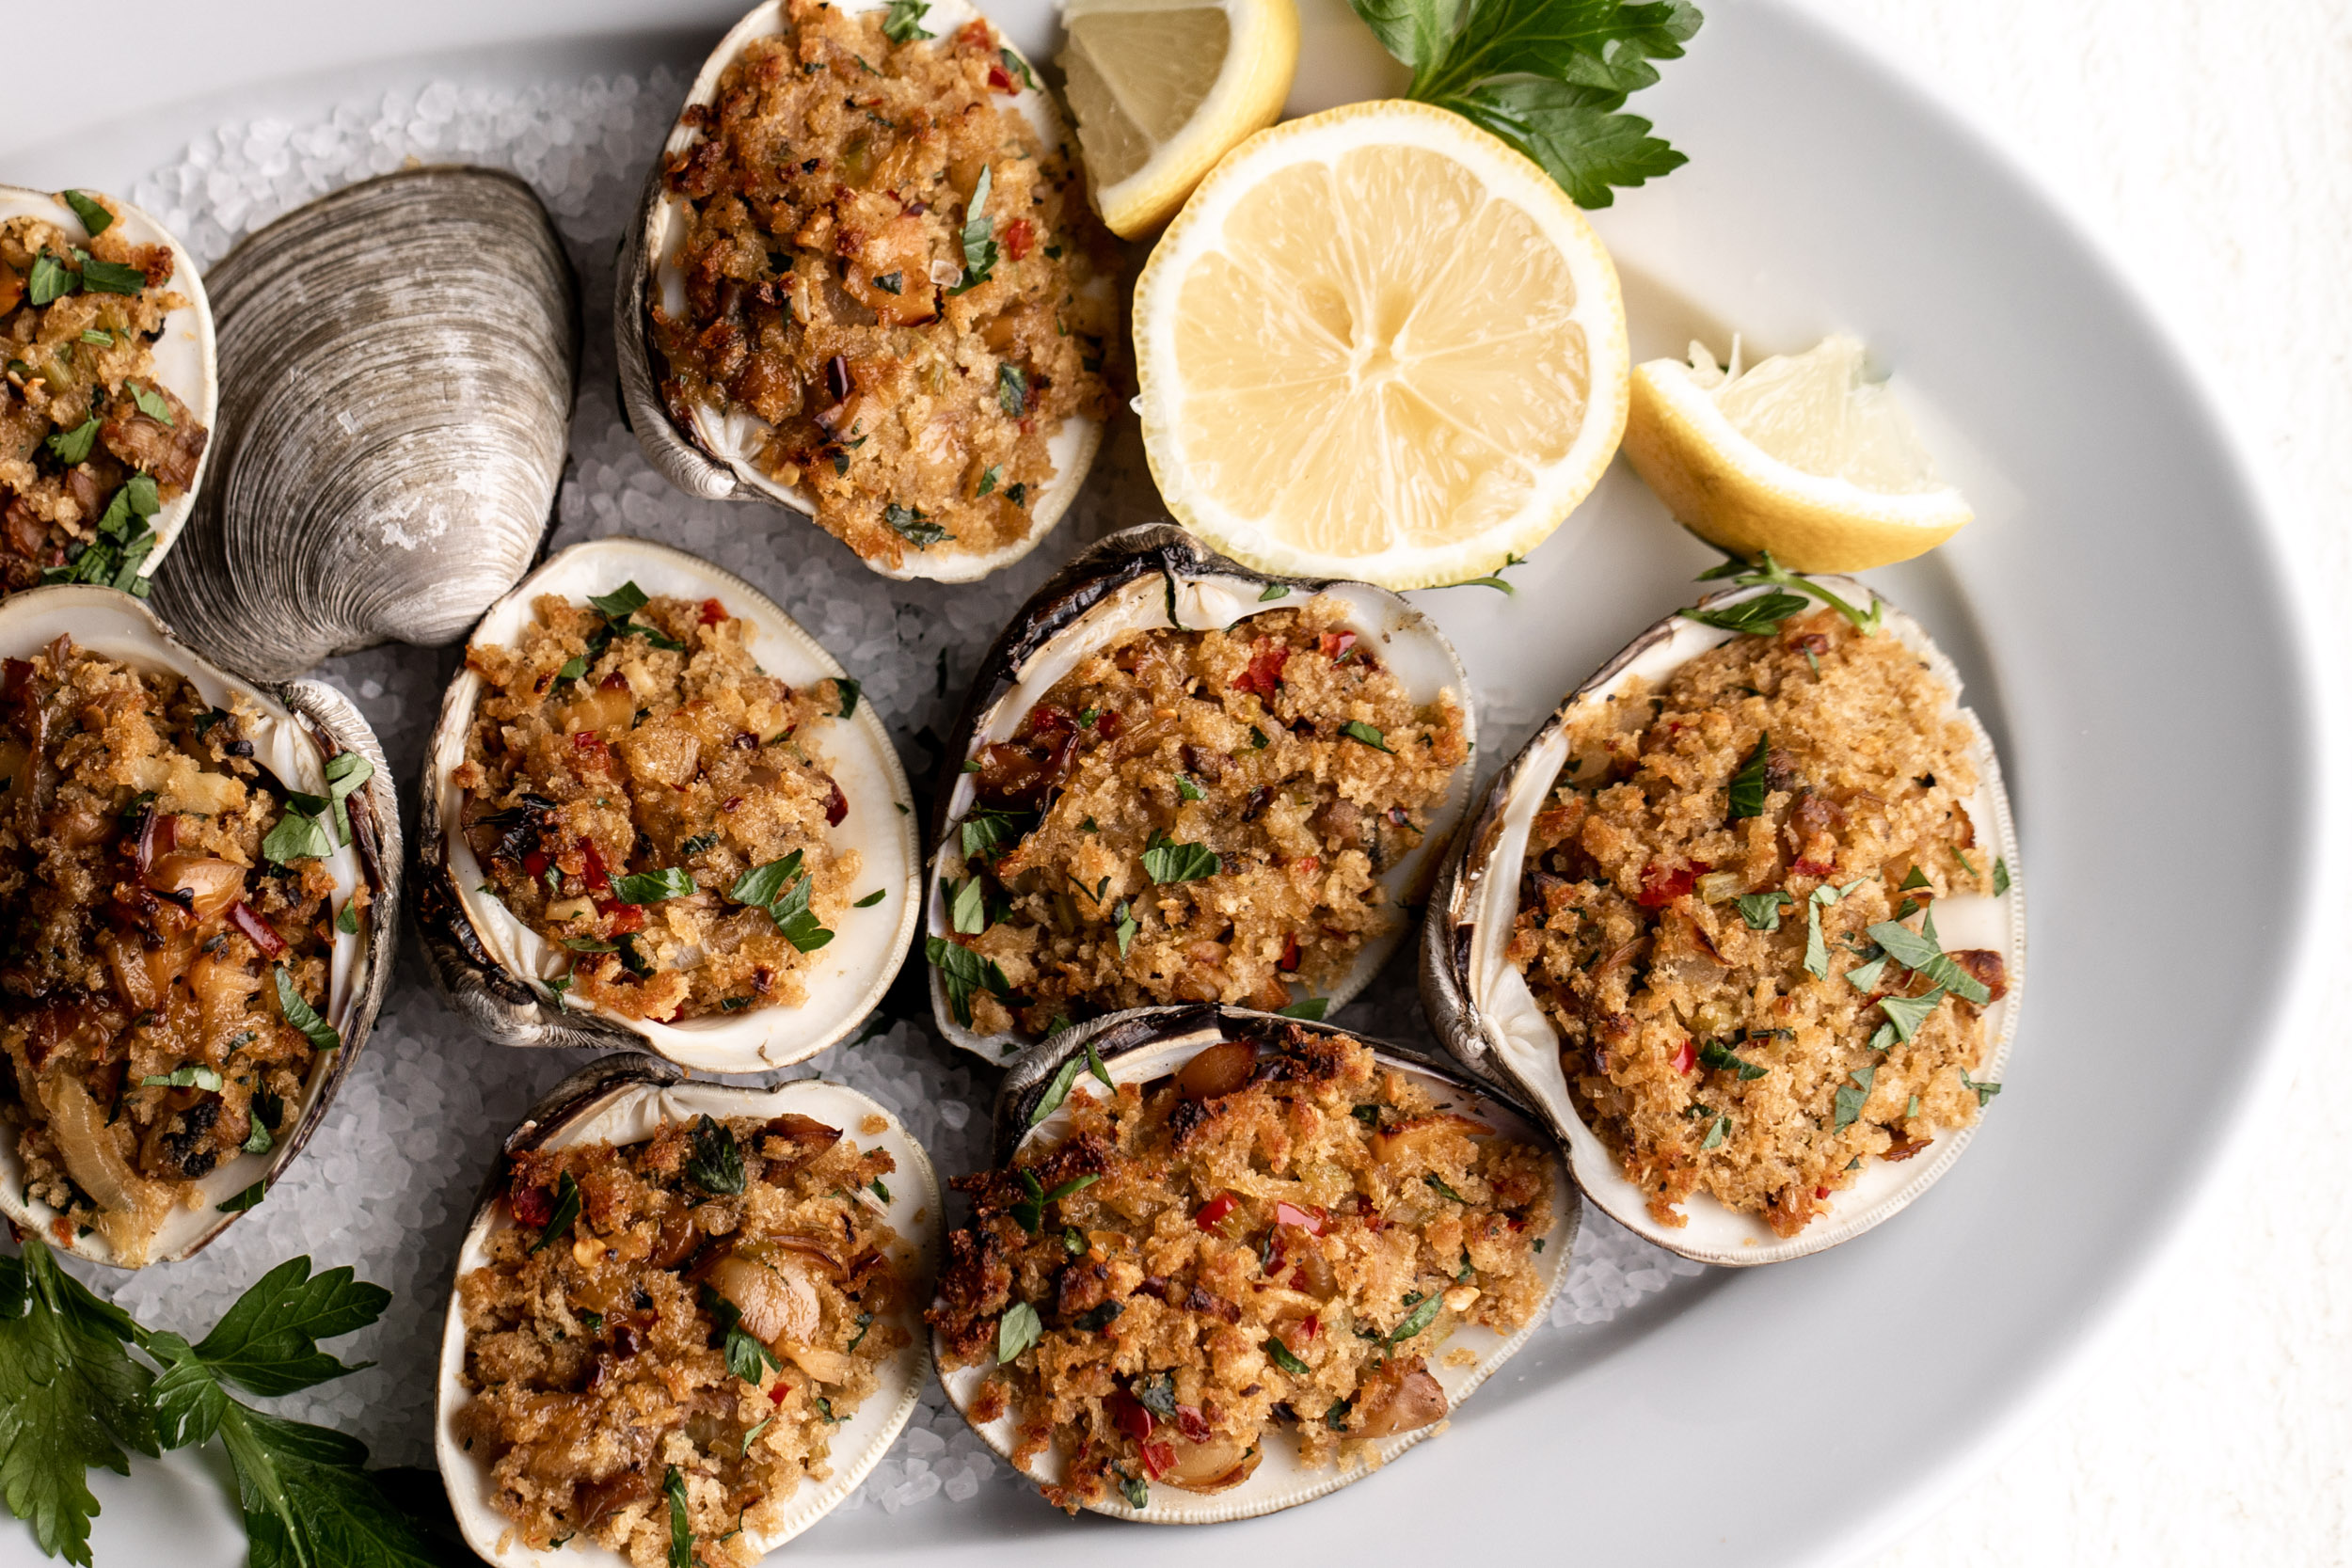 https://cookingwithcocktailrings.com/wp-content/uploads/2021/12/Baked-Stuffed-Clams-Recipe-35.jpg